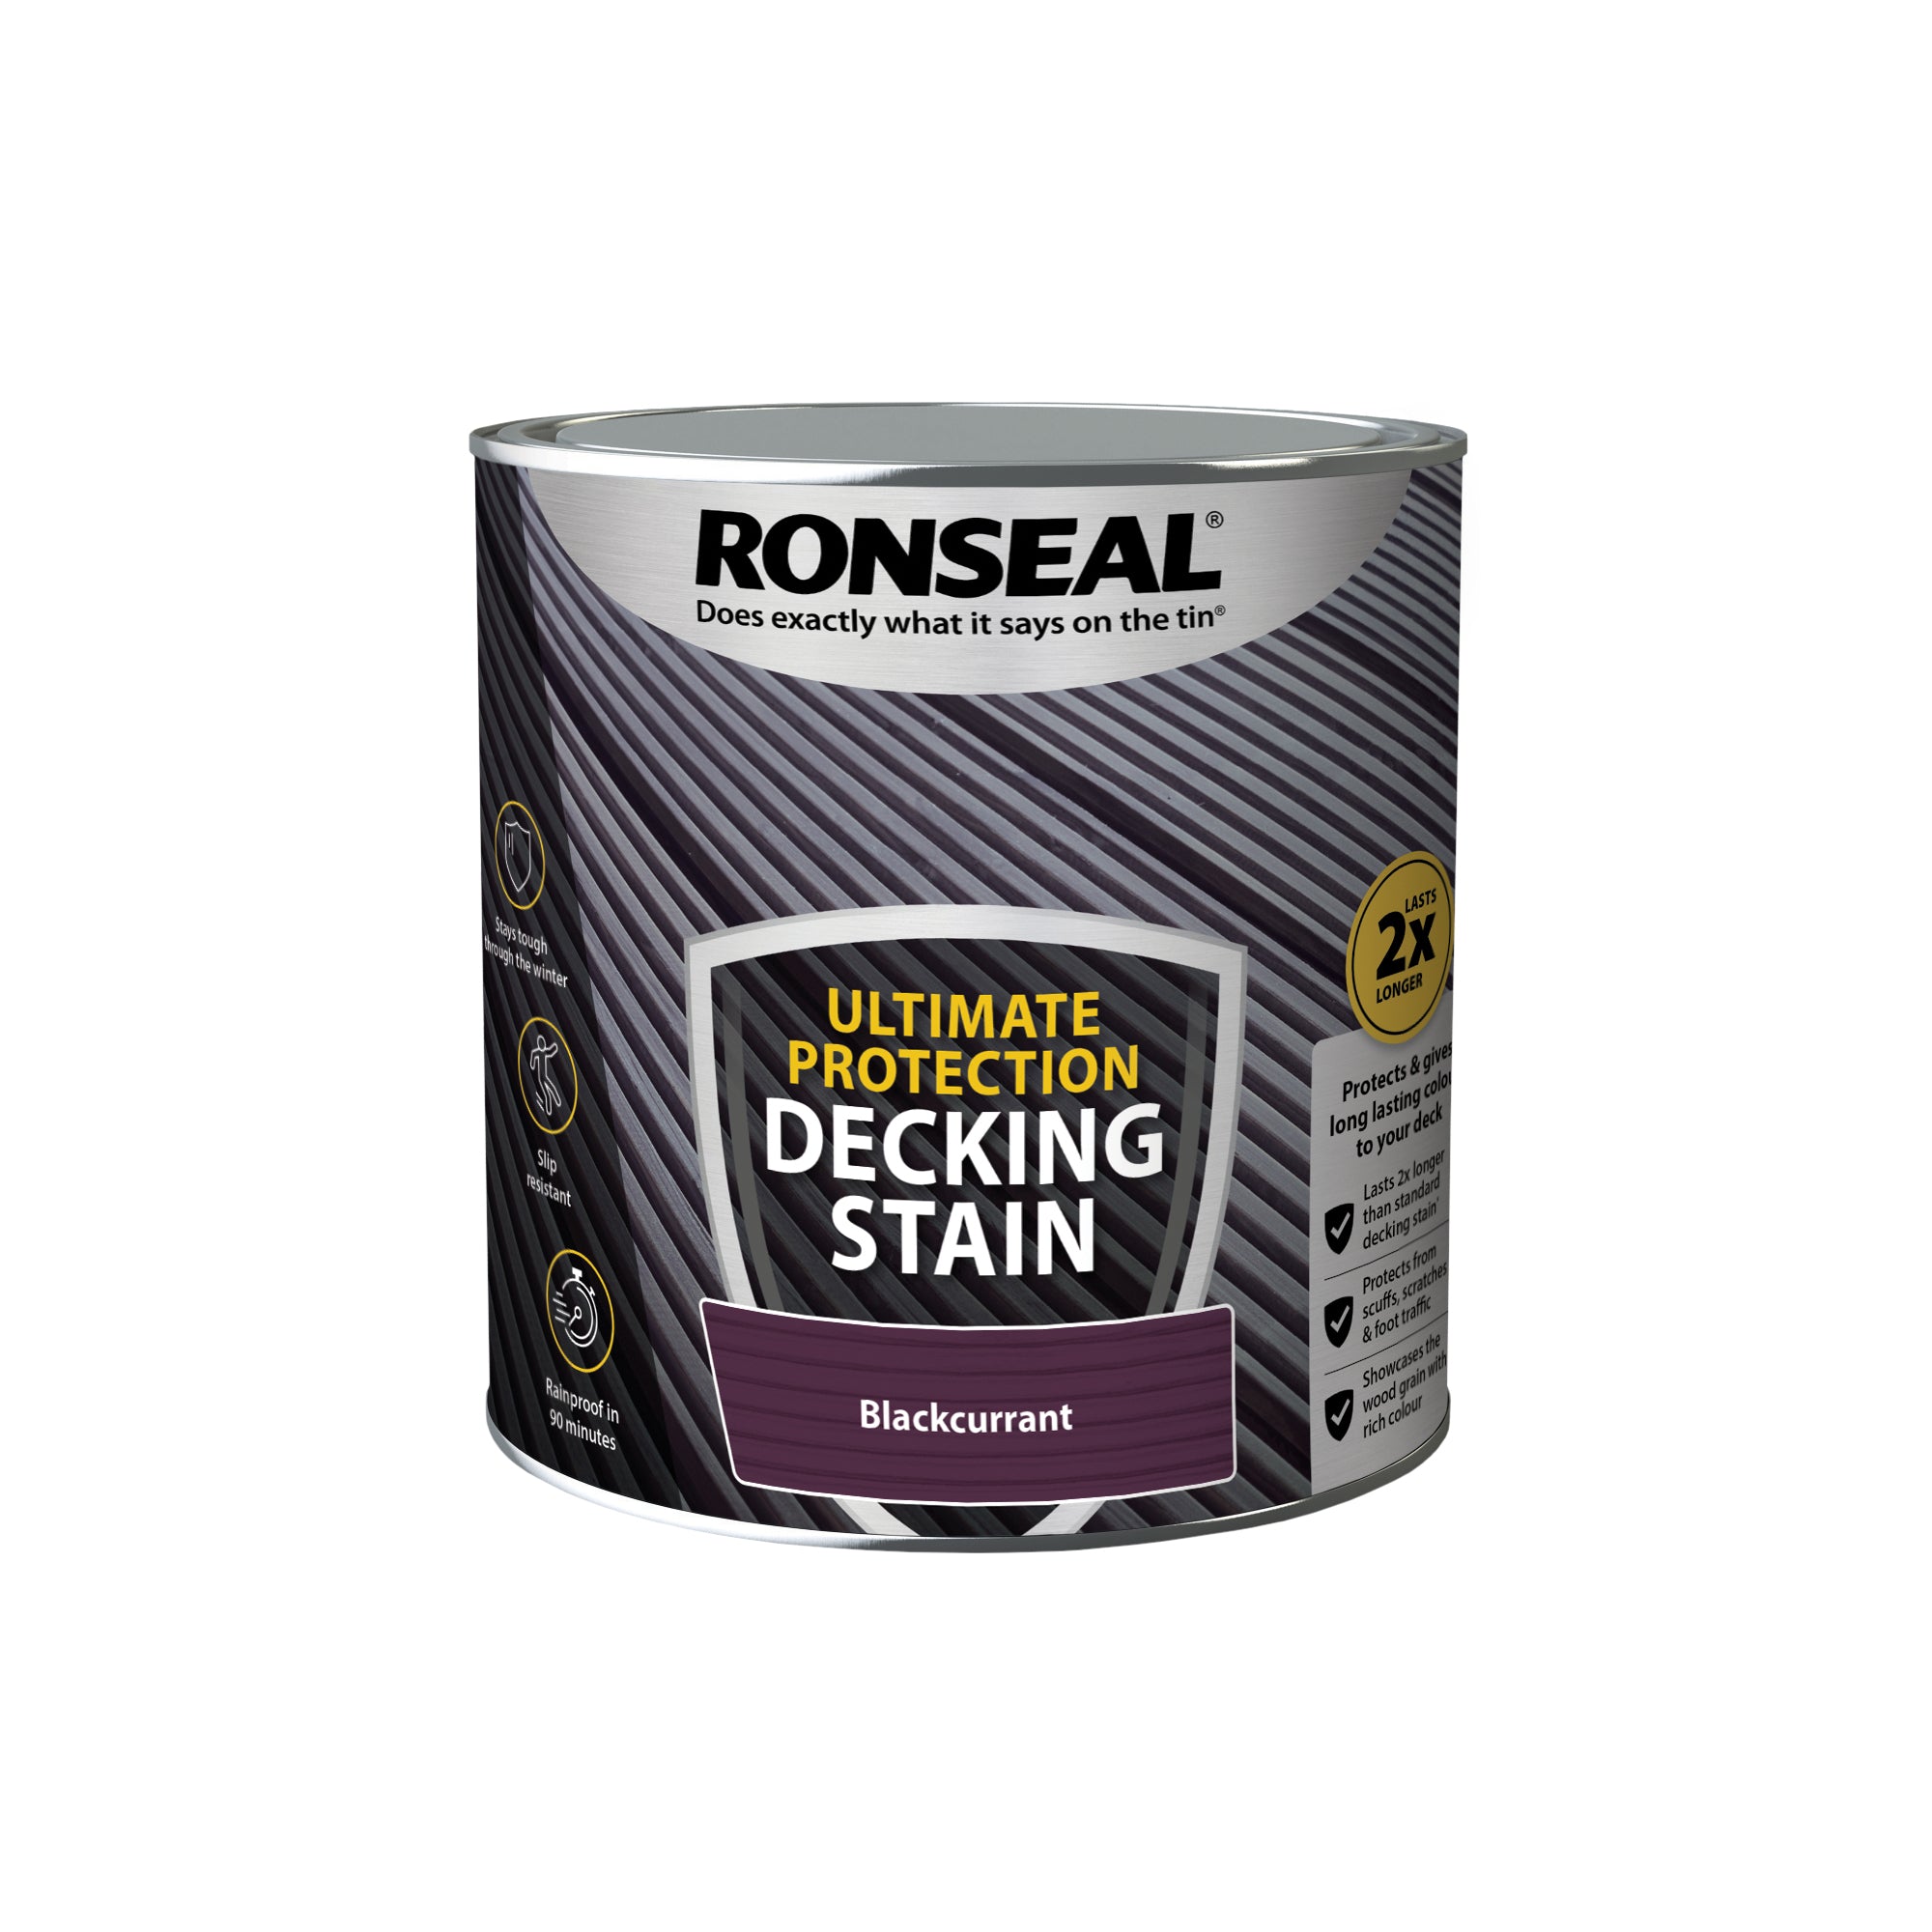 Ronseal-Ultimate-Protection-Decking-Stain-Blackcurrent-2.5L